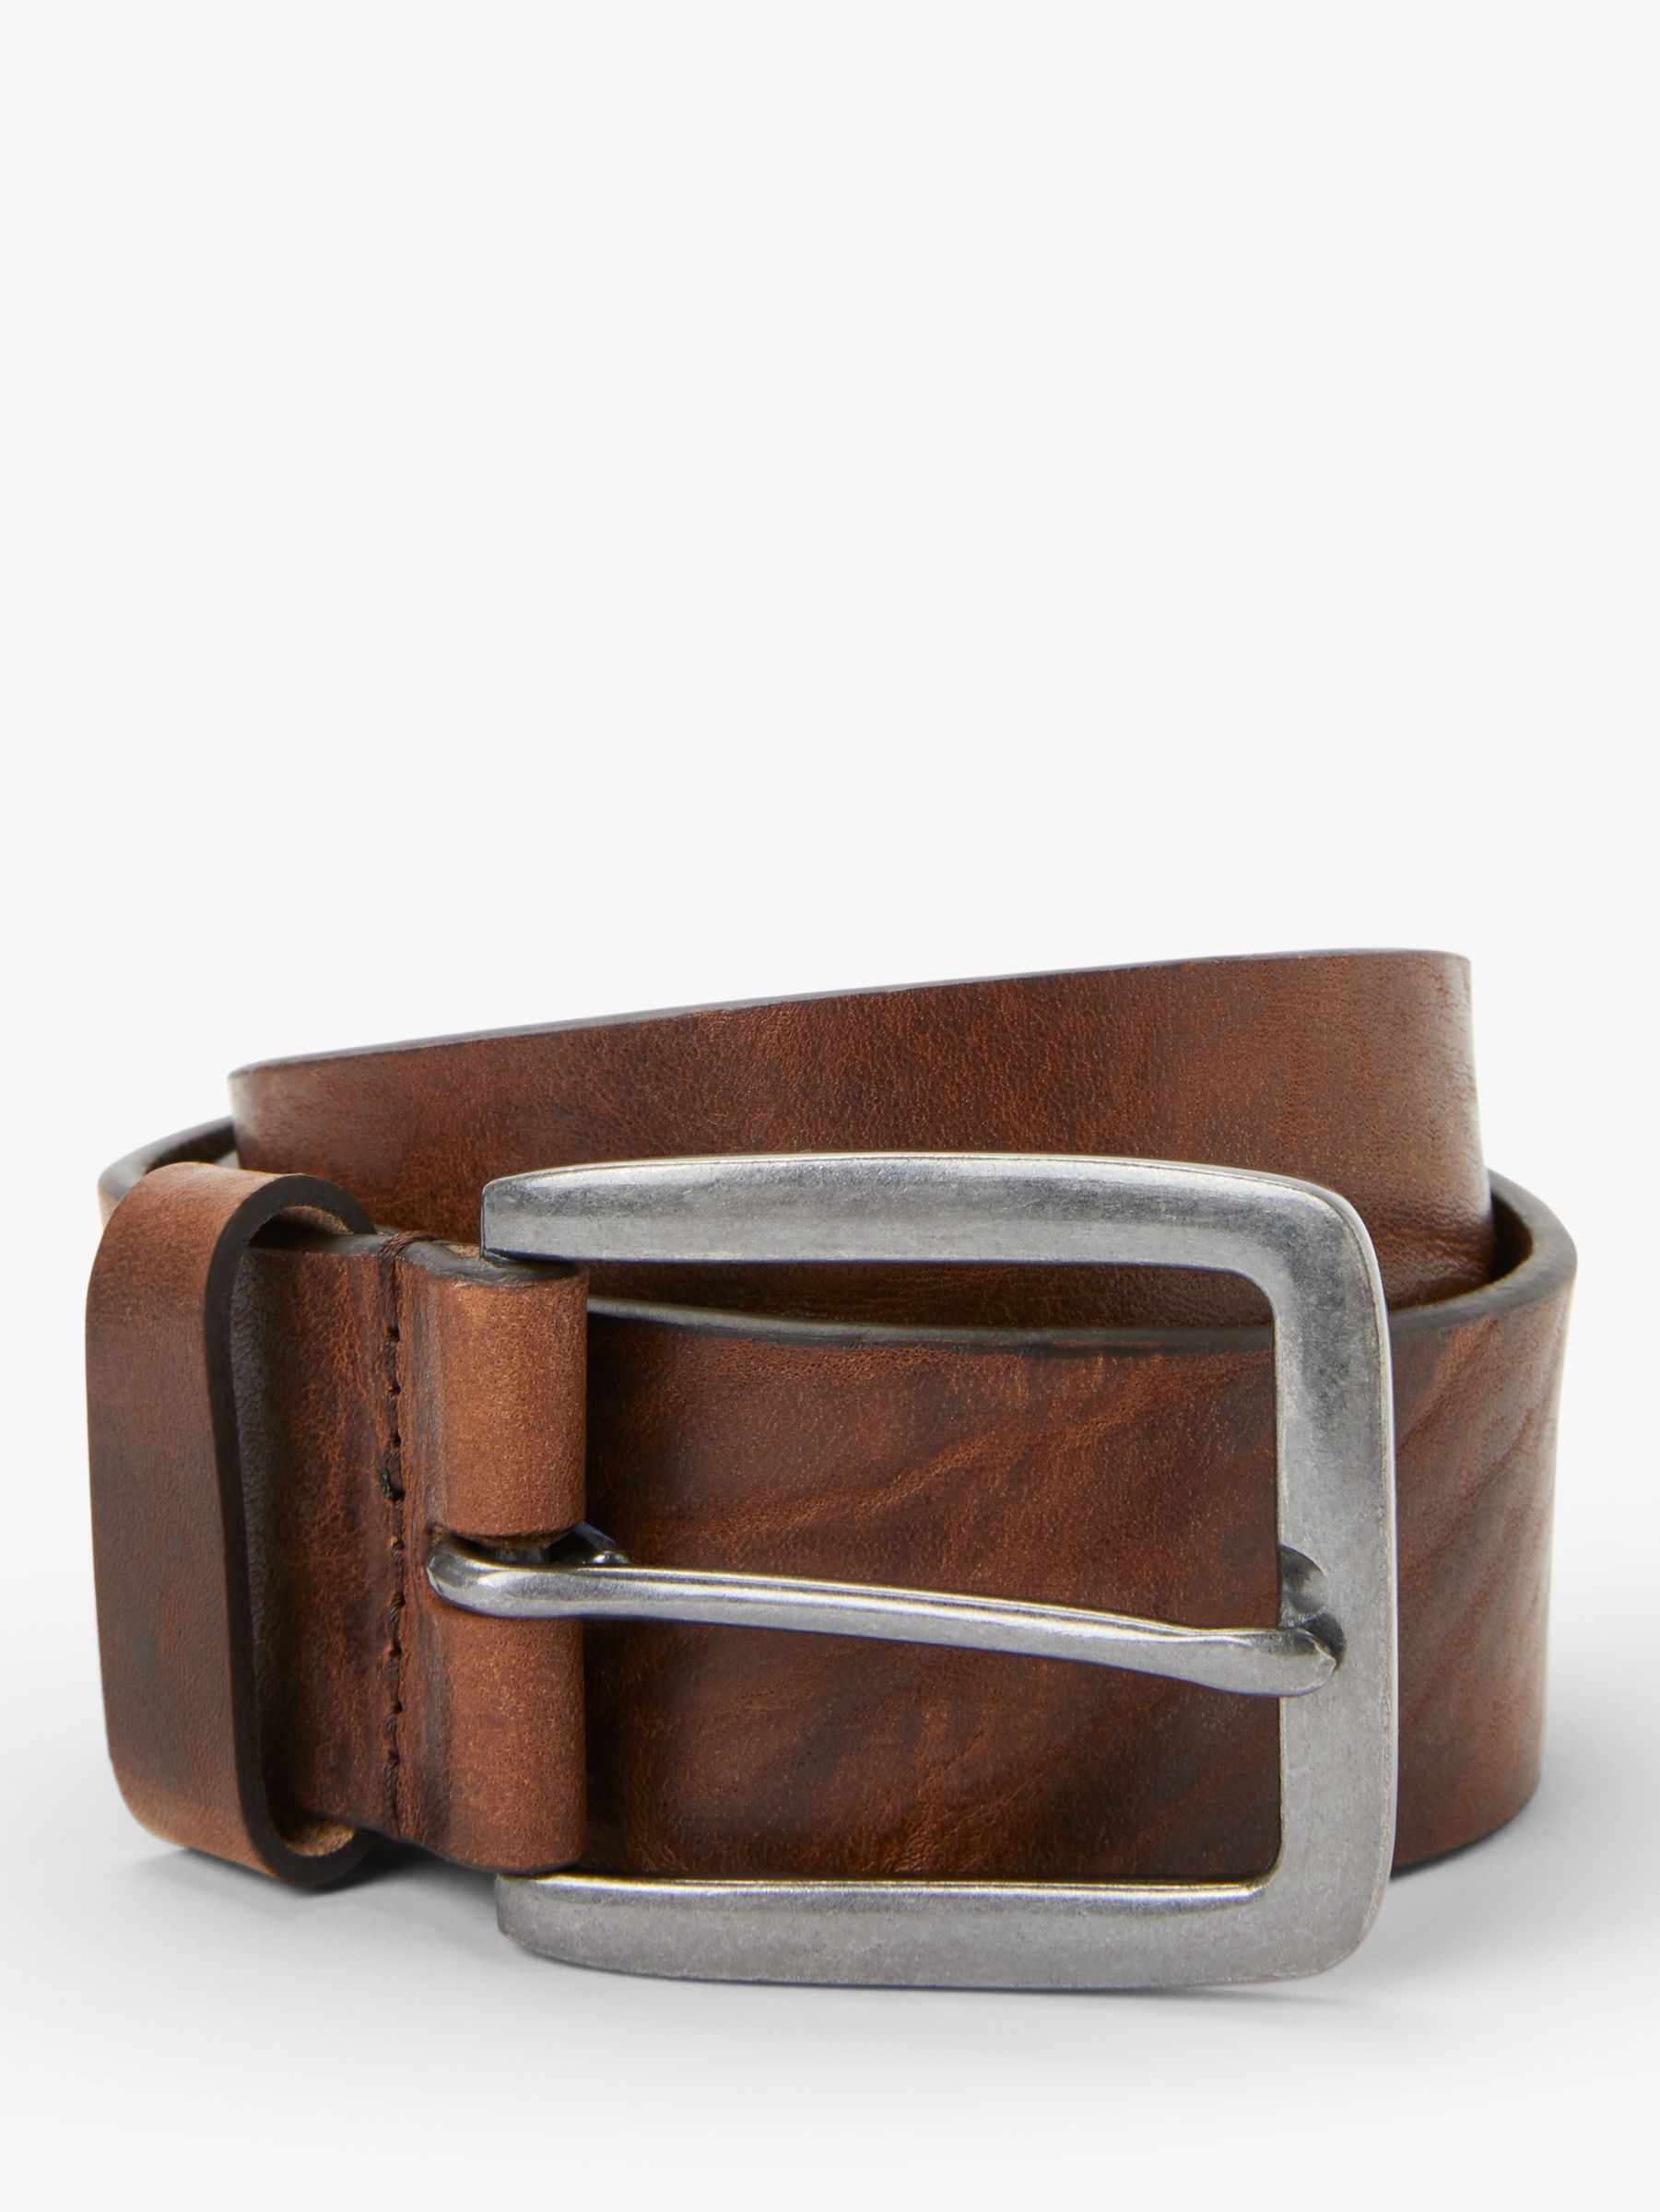 John Lewis Made in Italy Leather Jeans Belt, Brown at John Lewis & Partners